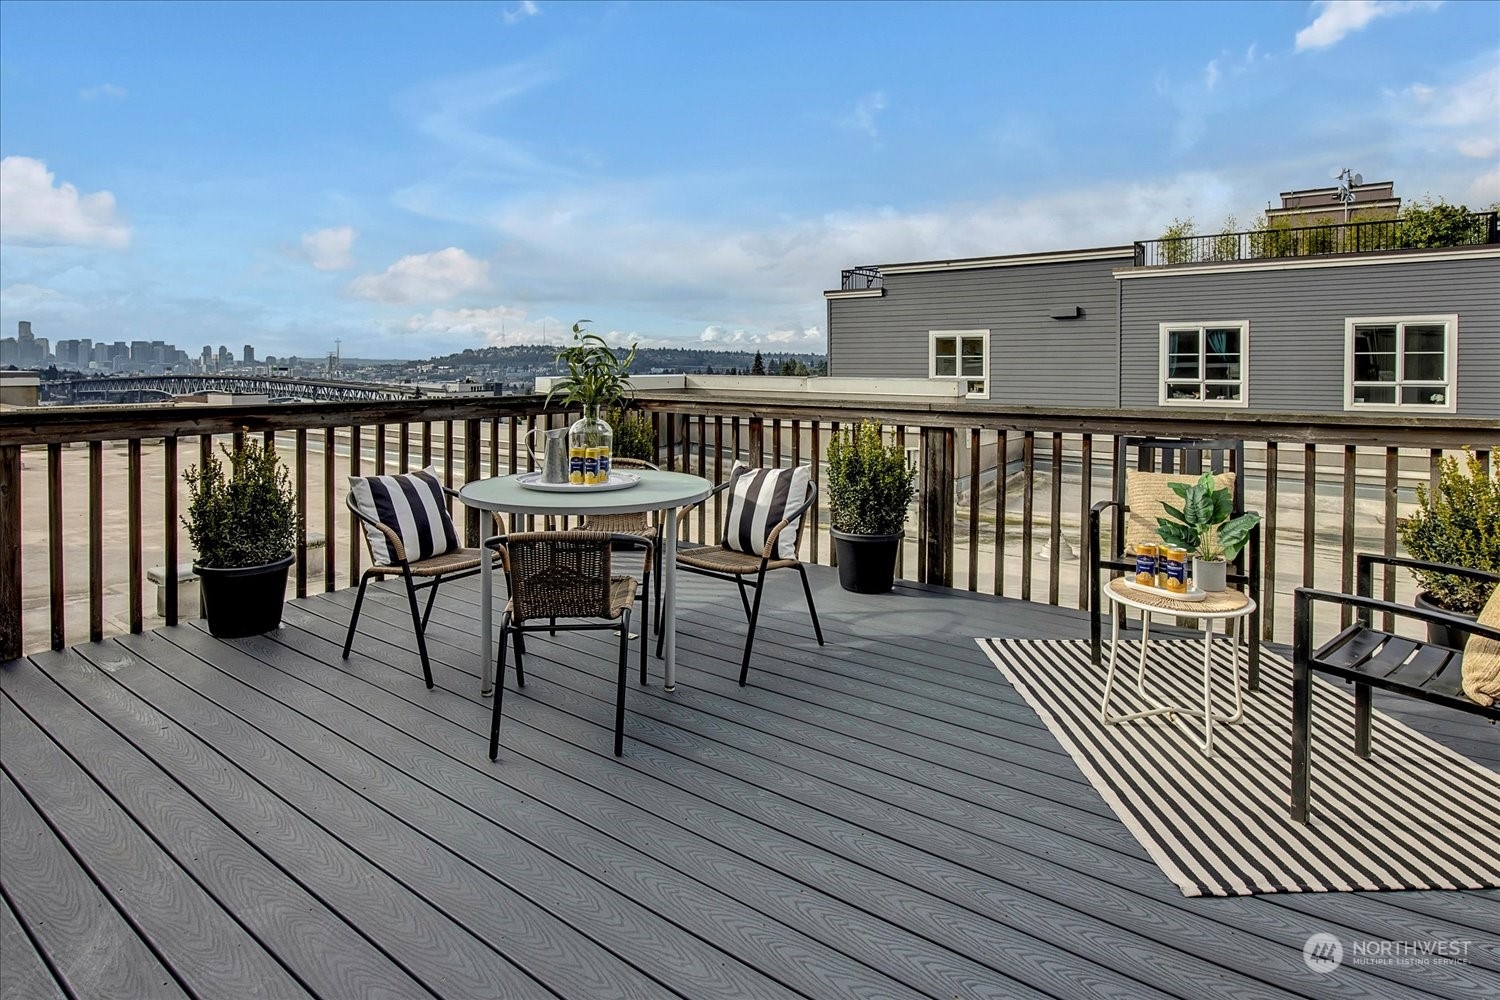 a view of a roof deck with table and chairs